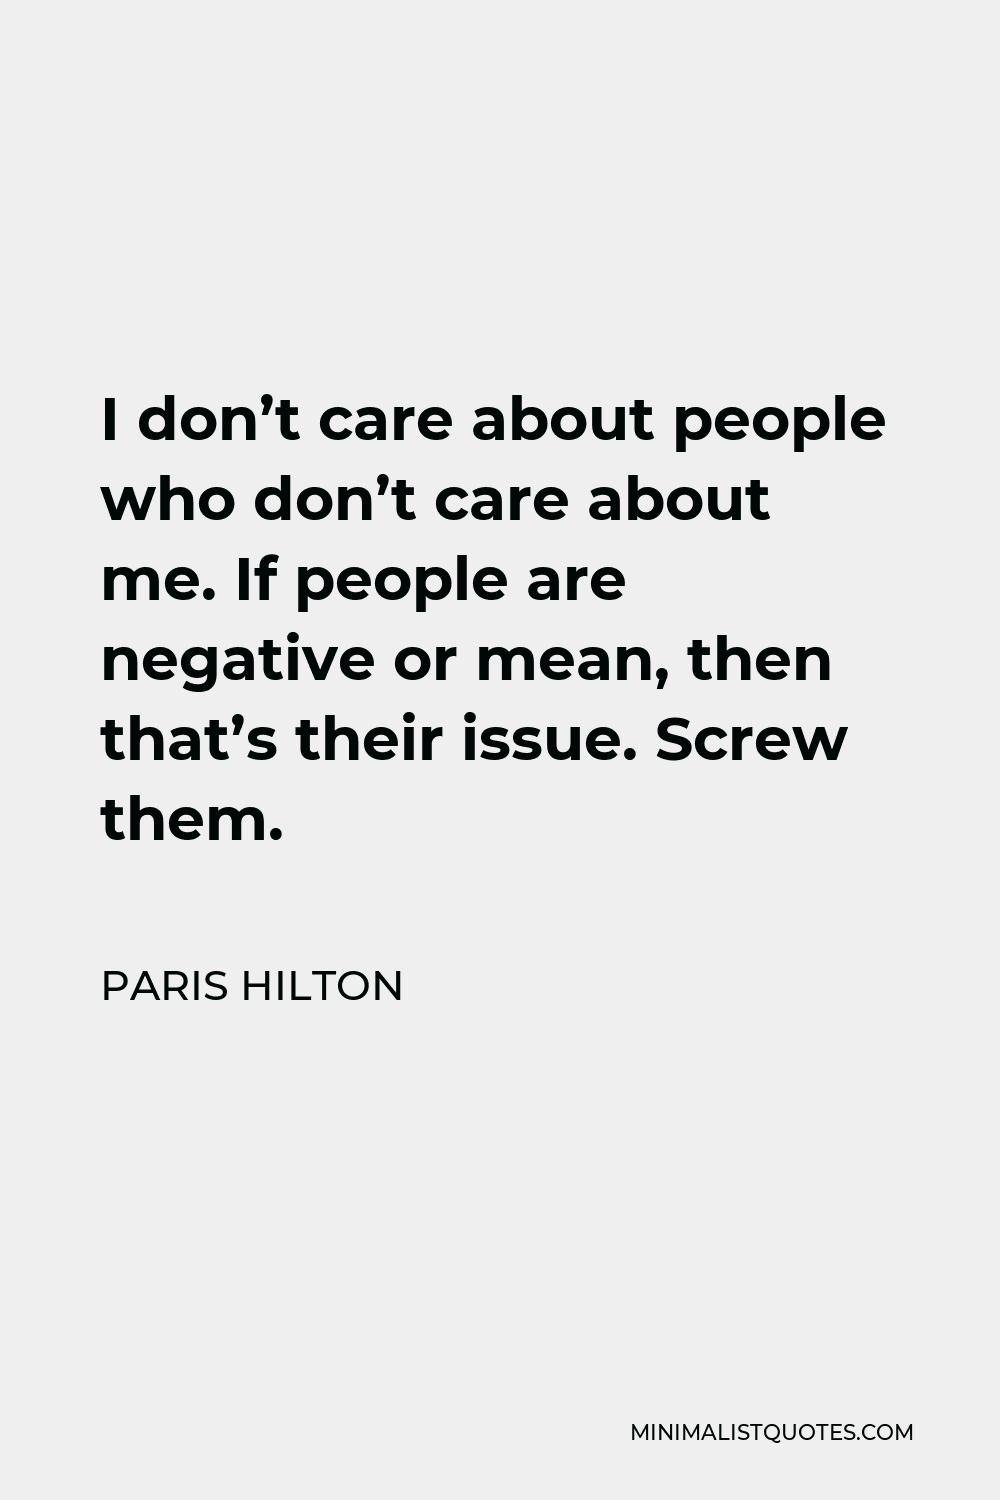 Paris Hilton Quote - I don’t care about people who don’t care about me. If people are negative or mean, then that’s their issue. Screw them.